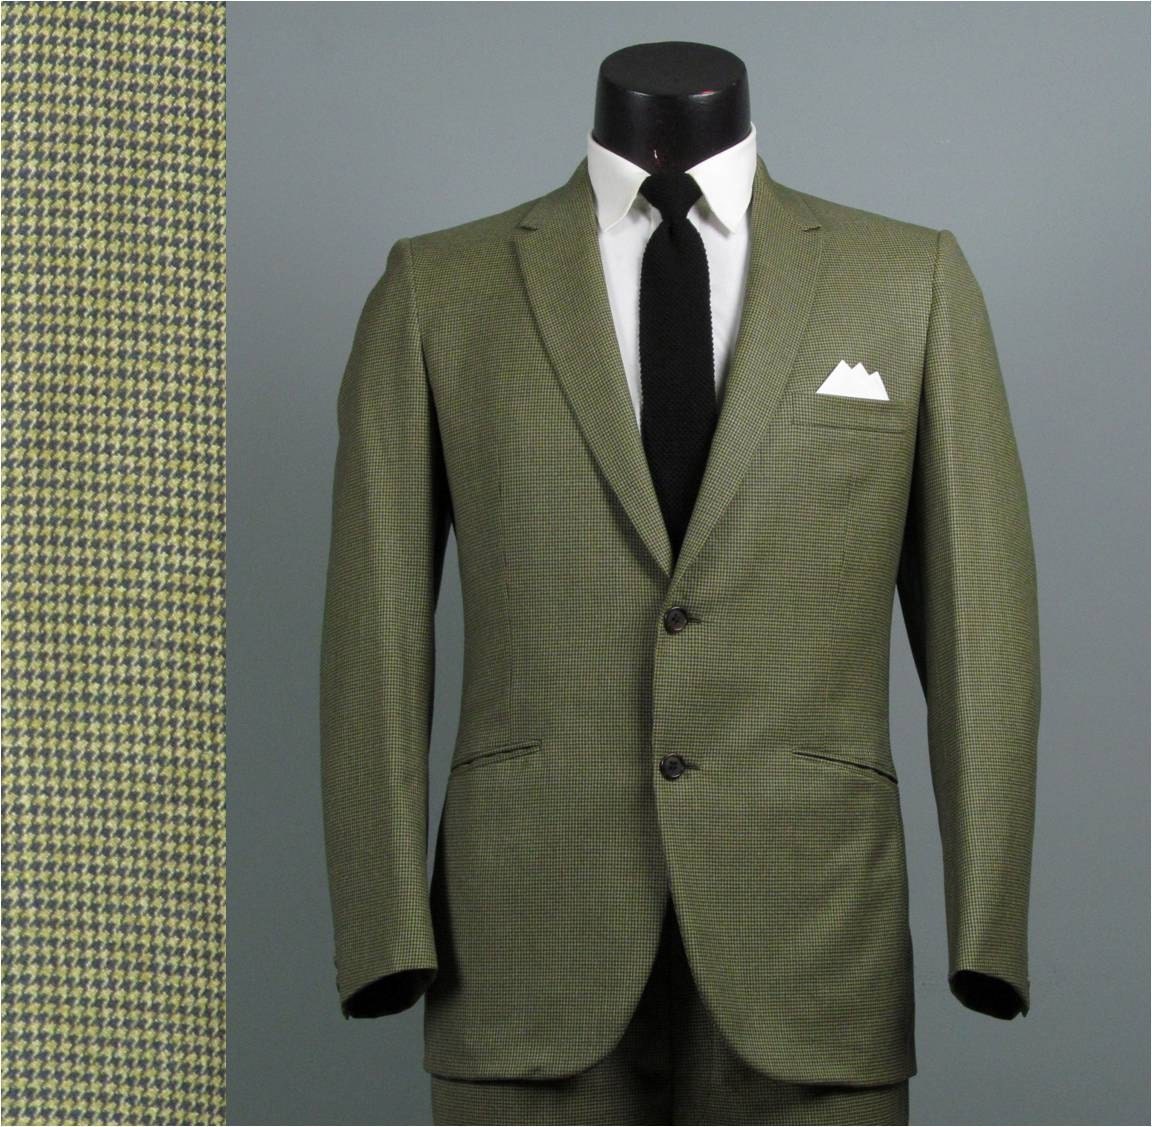 Vintage Mens Suit 1960s Golden Olive and Black HICKEY FREEMAN
 1960s Mens Suits